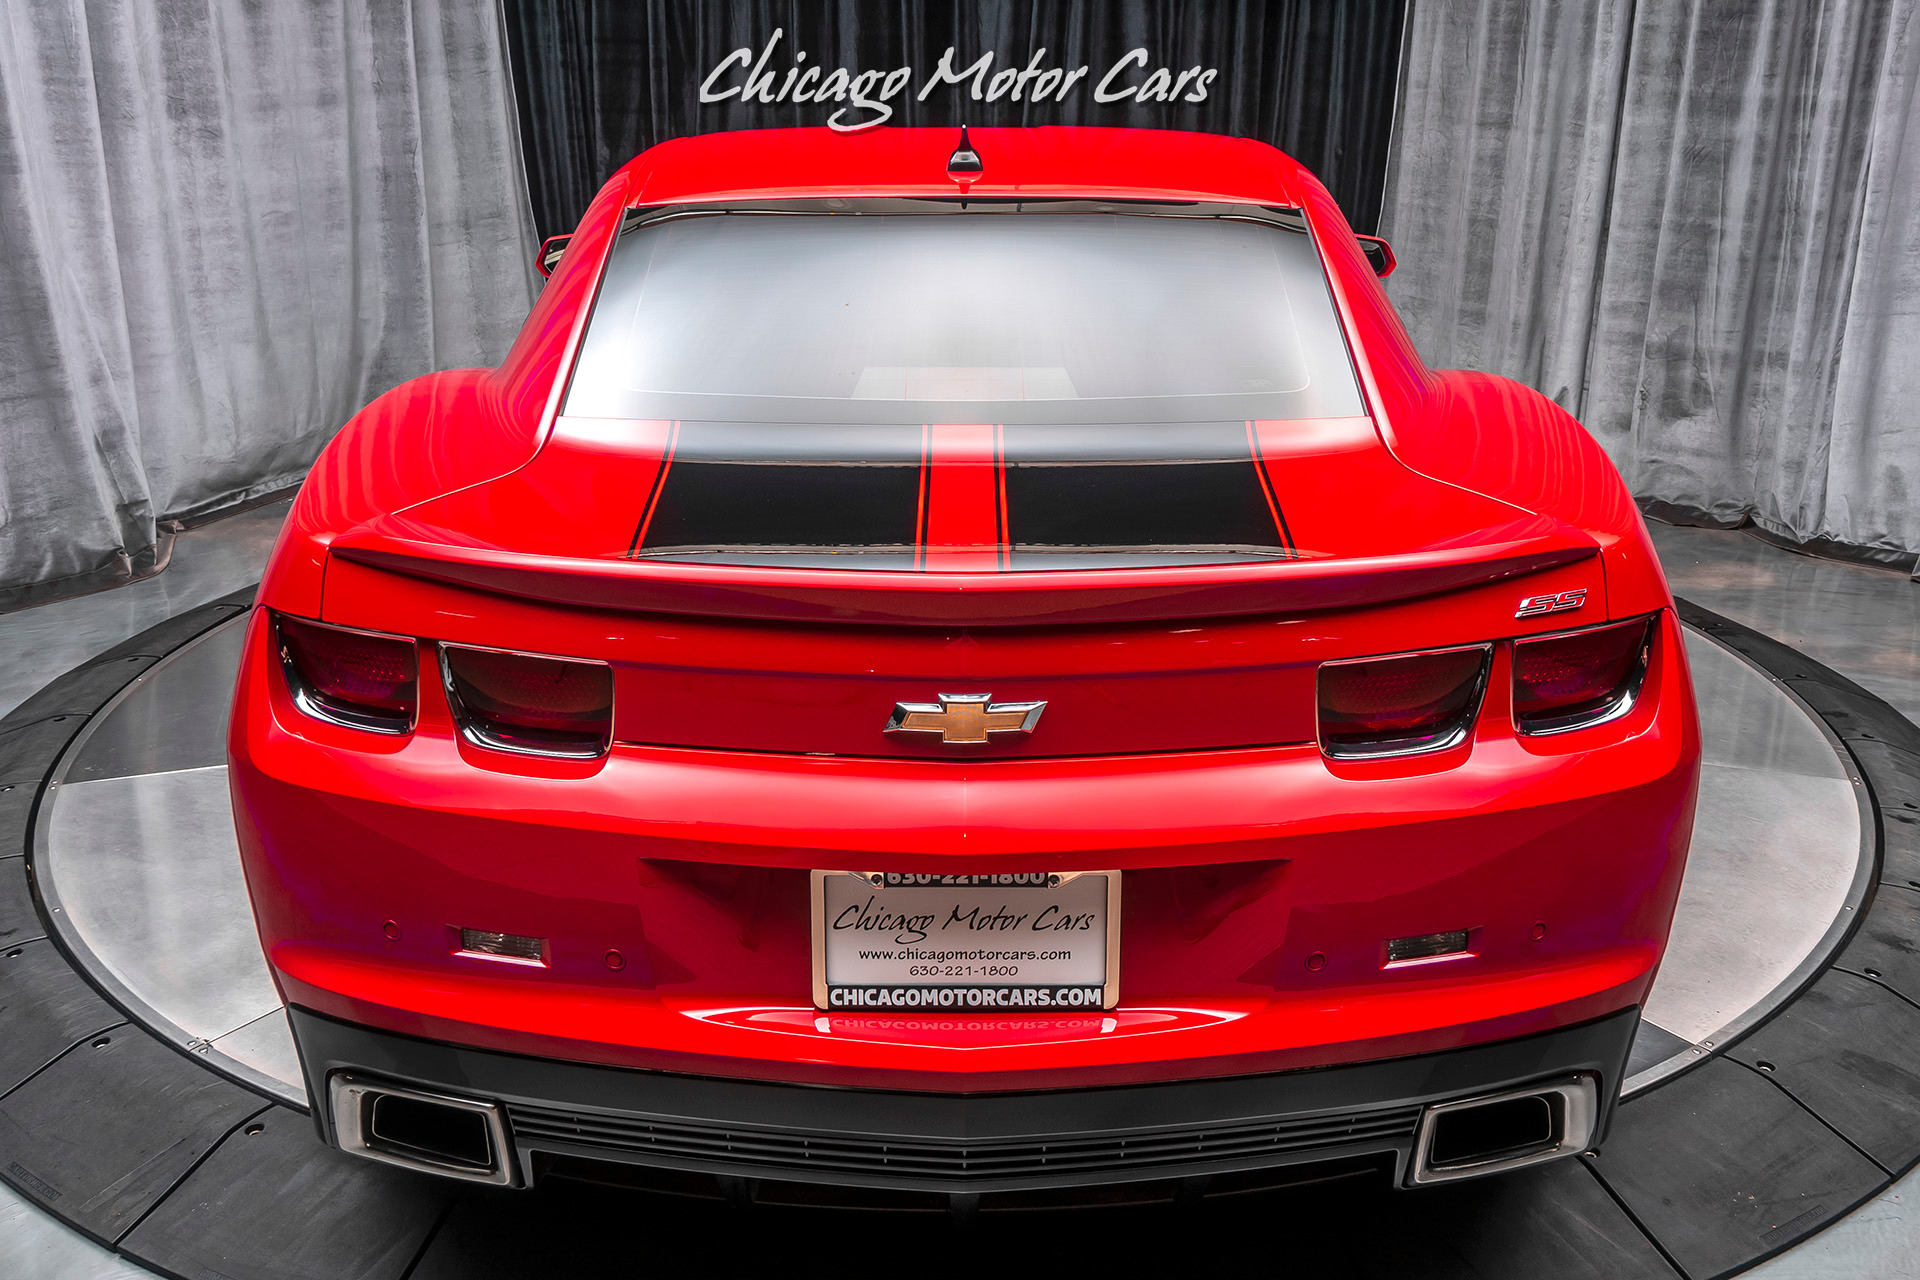 Used-2010-Chevrolet-Camaro-SS-2SS-with-Upgraded-Exhaust